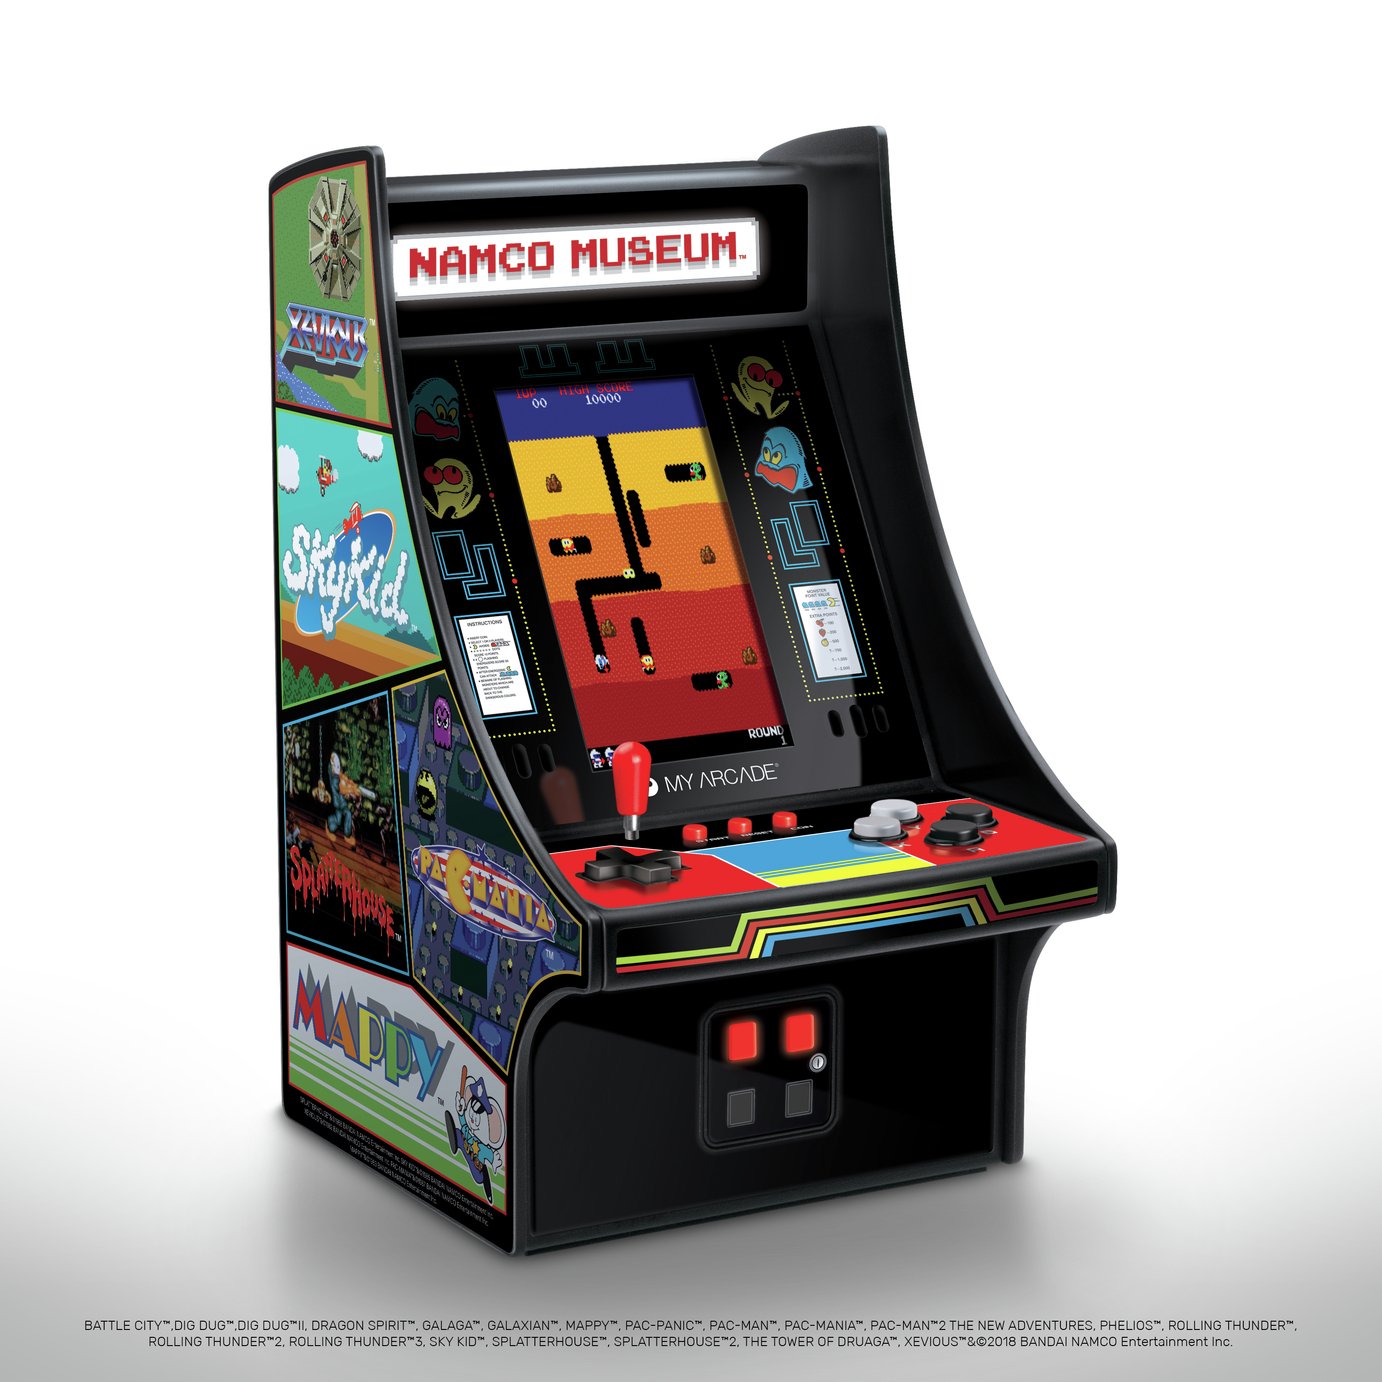 Namco Museum Hits Mini Arcade Machine with 20 Games Review